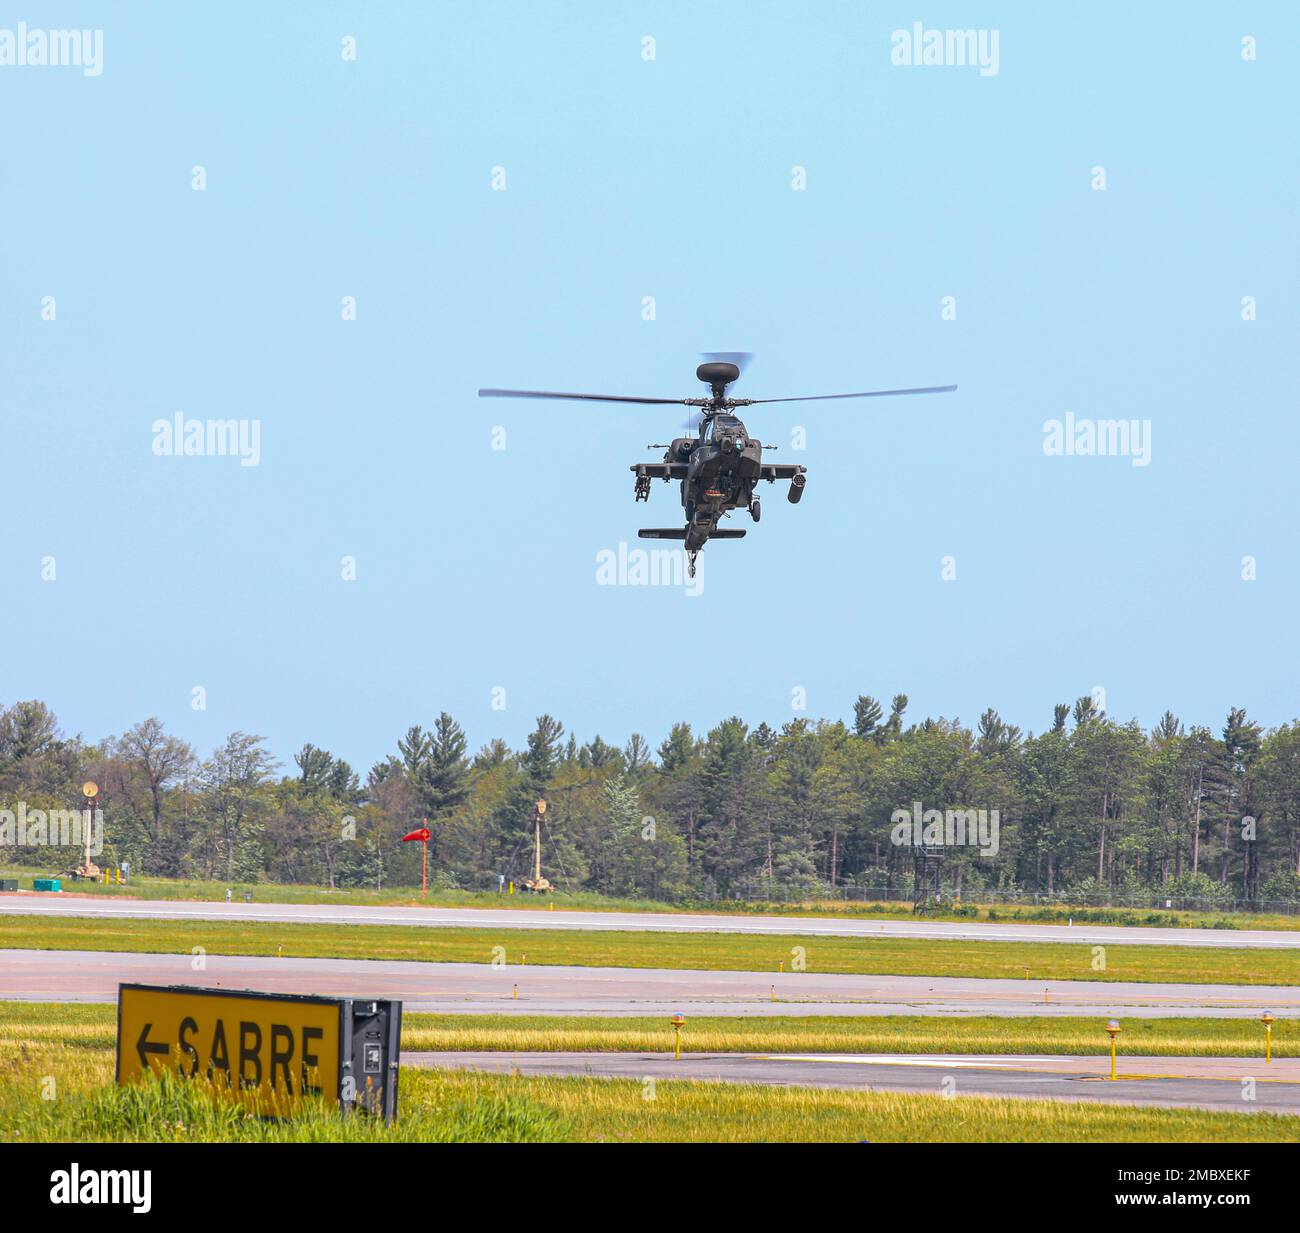 U.S. Army Lt. Col. Beau Rollie, 6-6 Air Cavalry Squadron commander, conducts his final flight as the 6-6 Squadron Commander on Fort Drum, NY Jun. 22, 2022. Lt. Col. Rollie was recieved by Cavalry Soldiers after he landed. Stock Photo